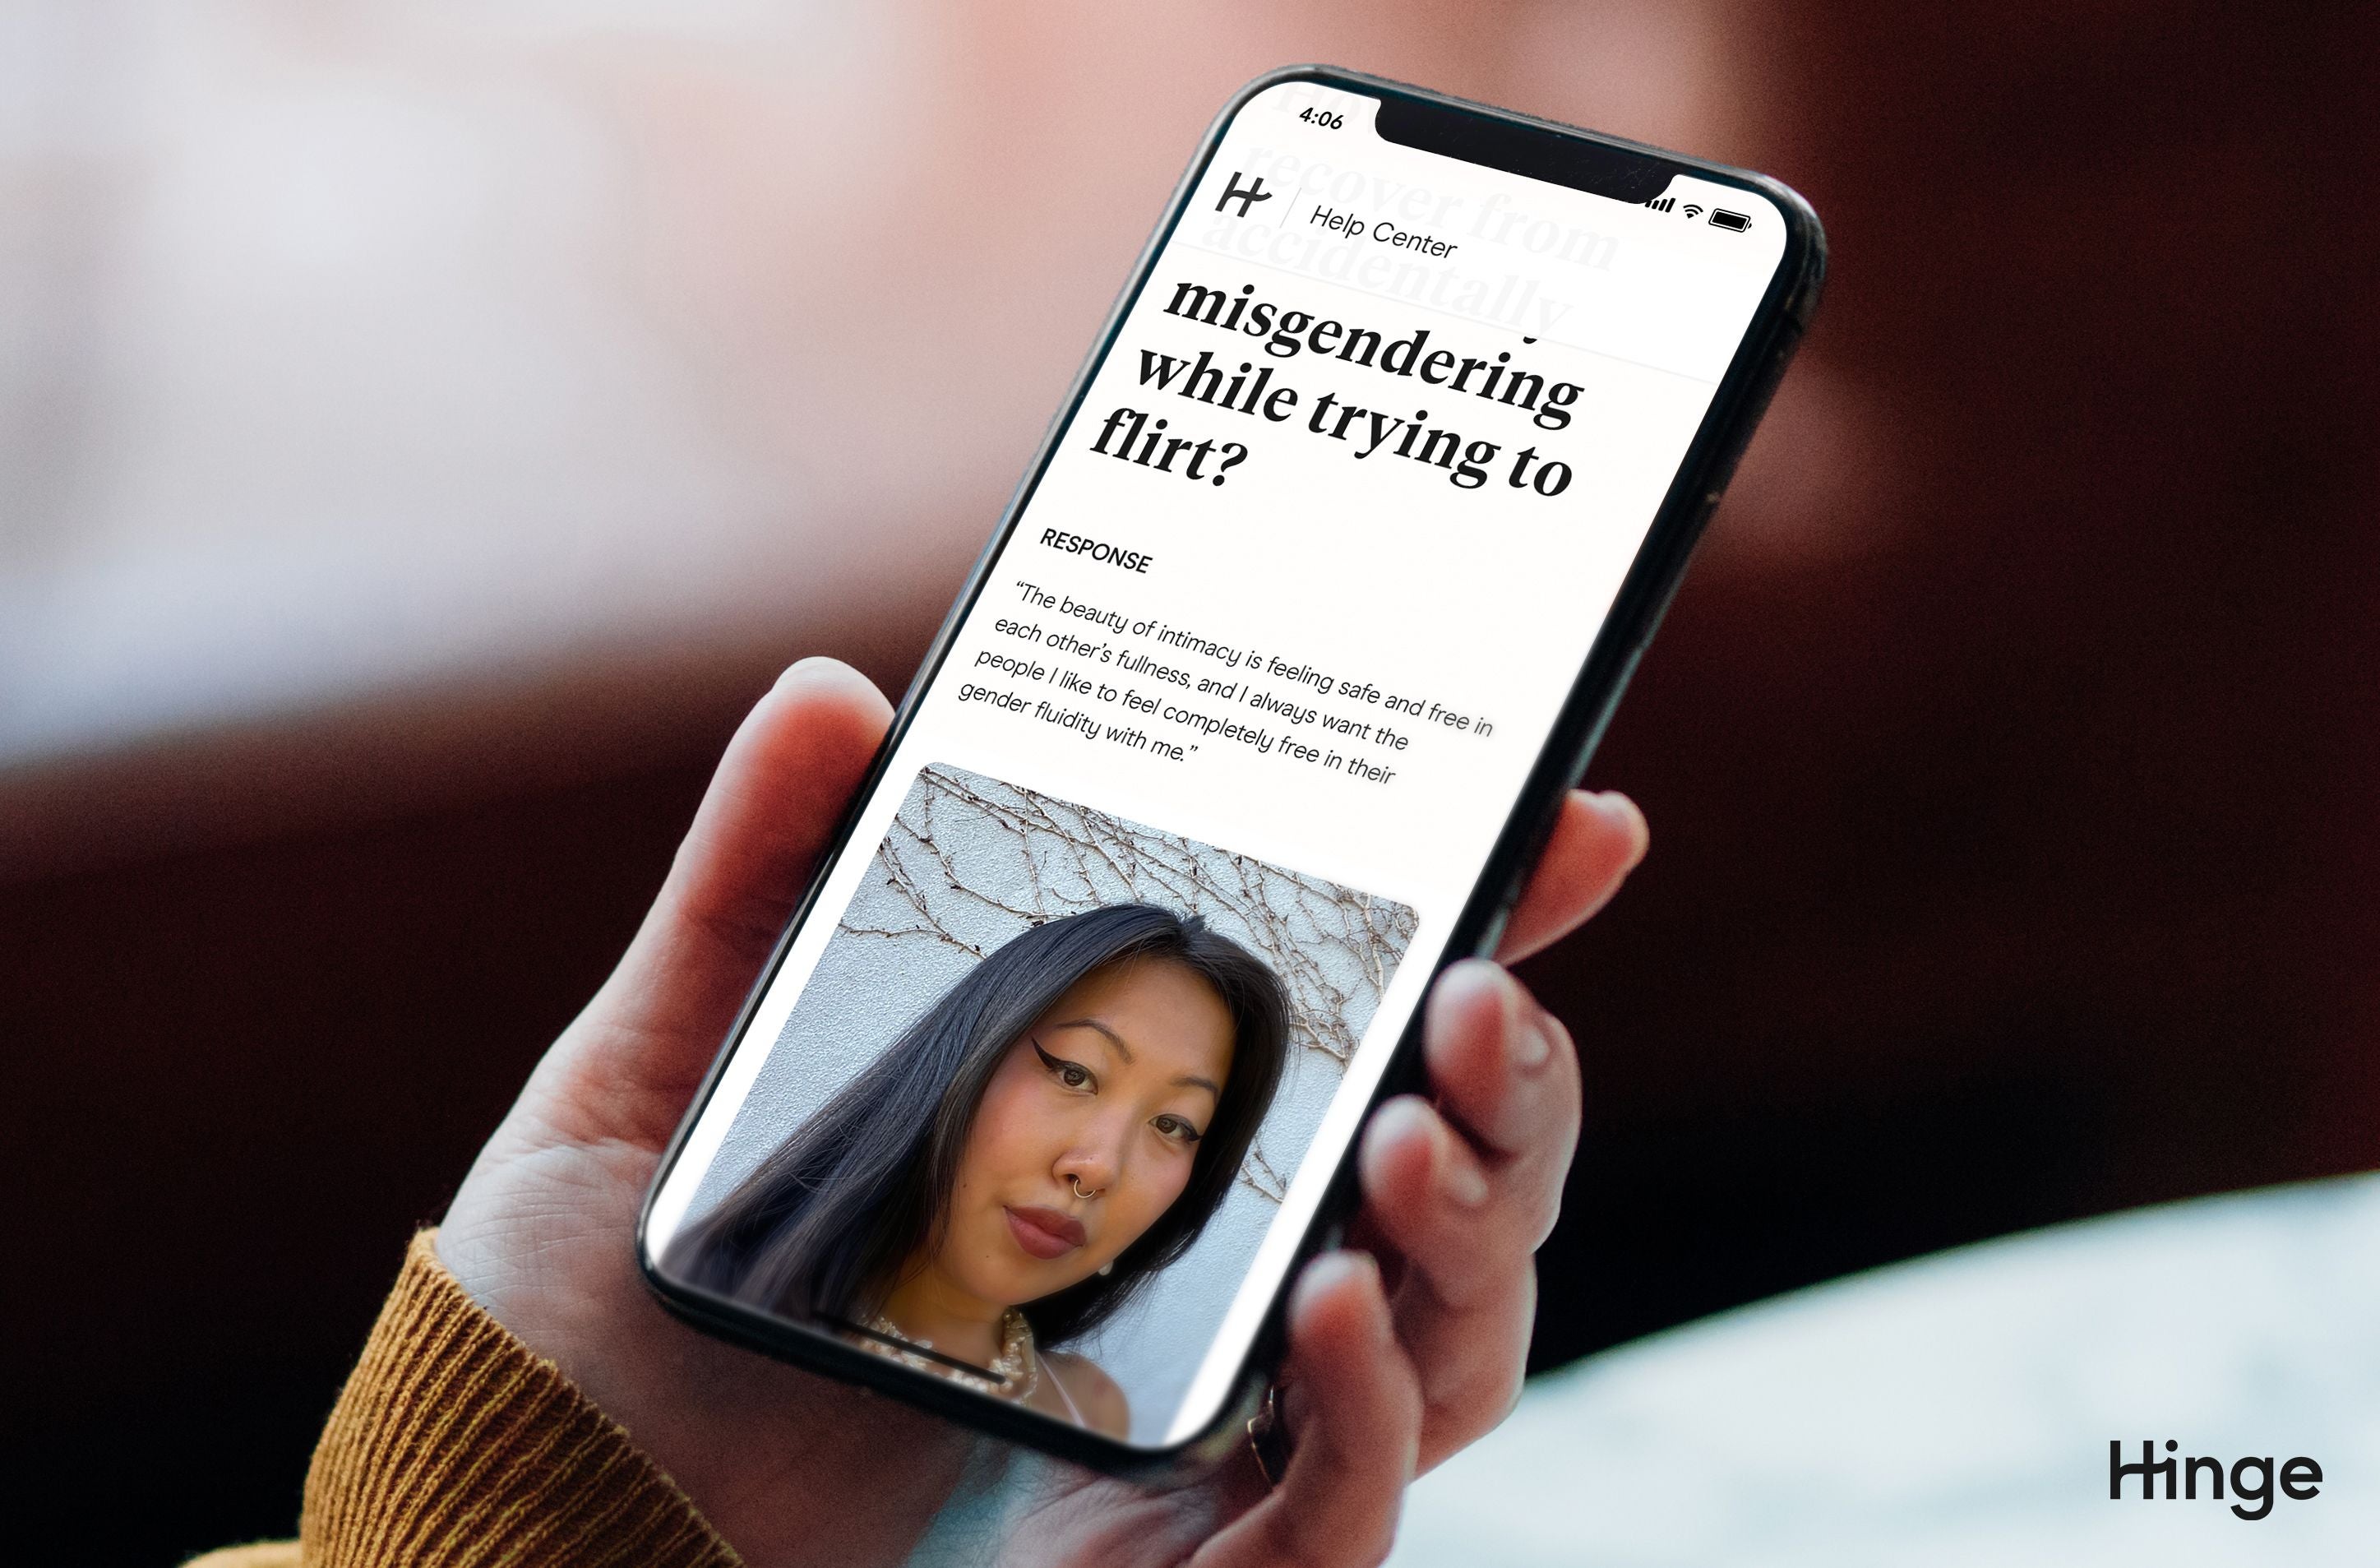 Hinge included perspectives from prominent queer influencers like author Mimi Zhu. (Image: Hinge)